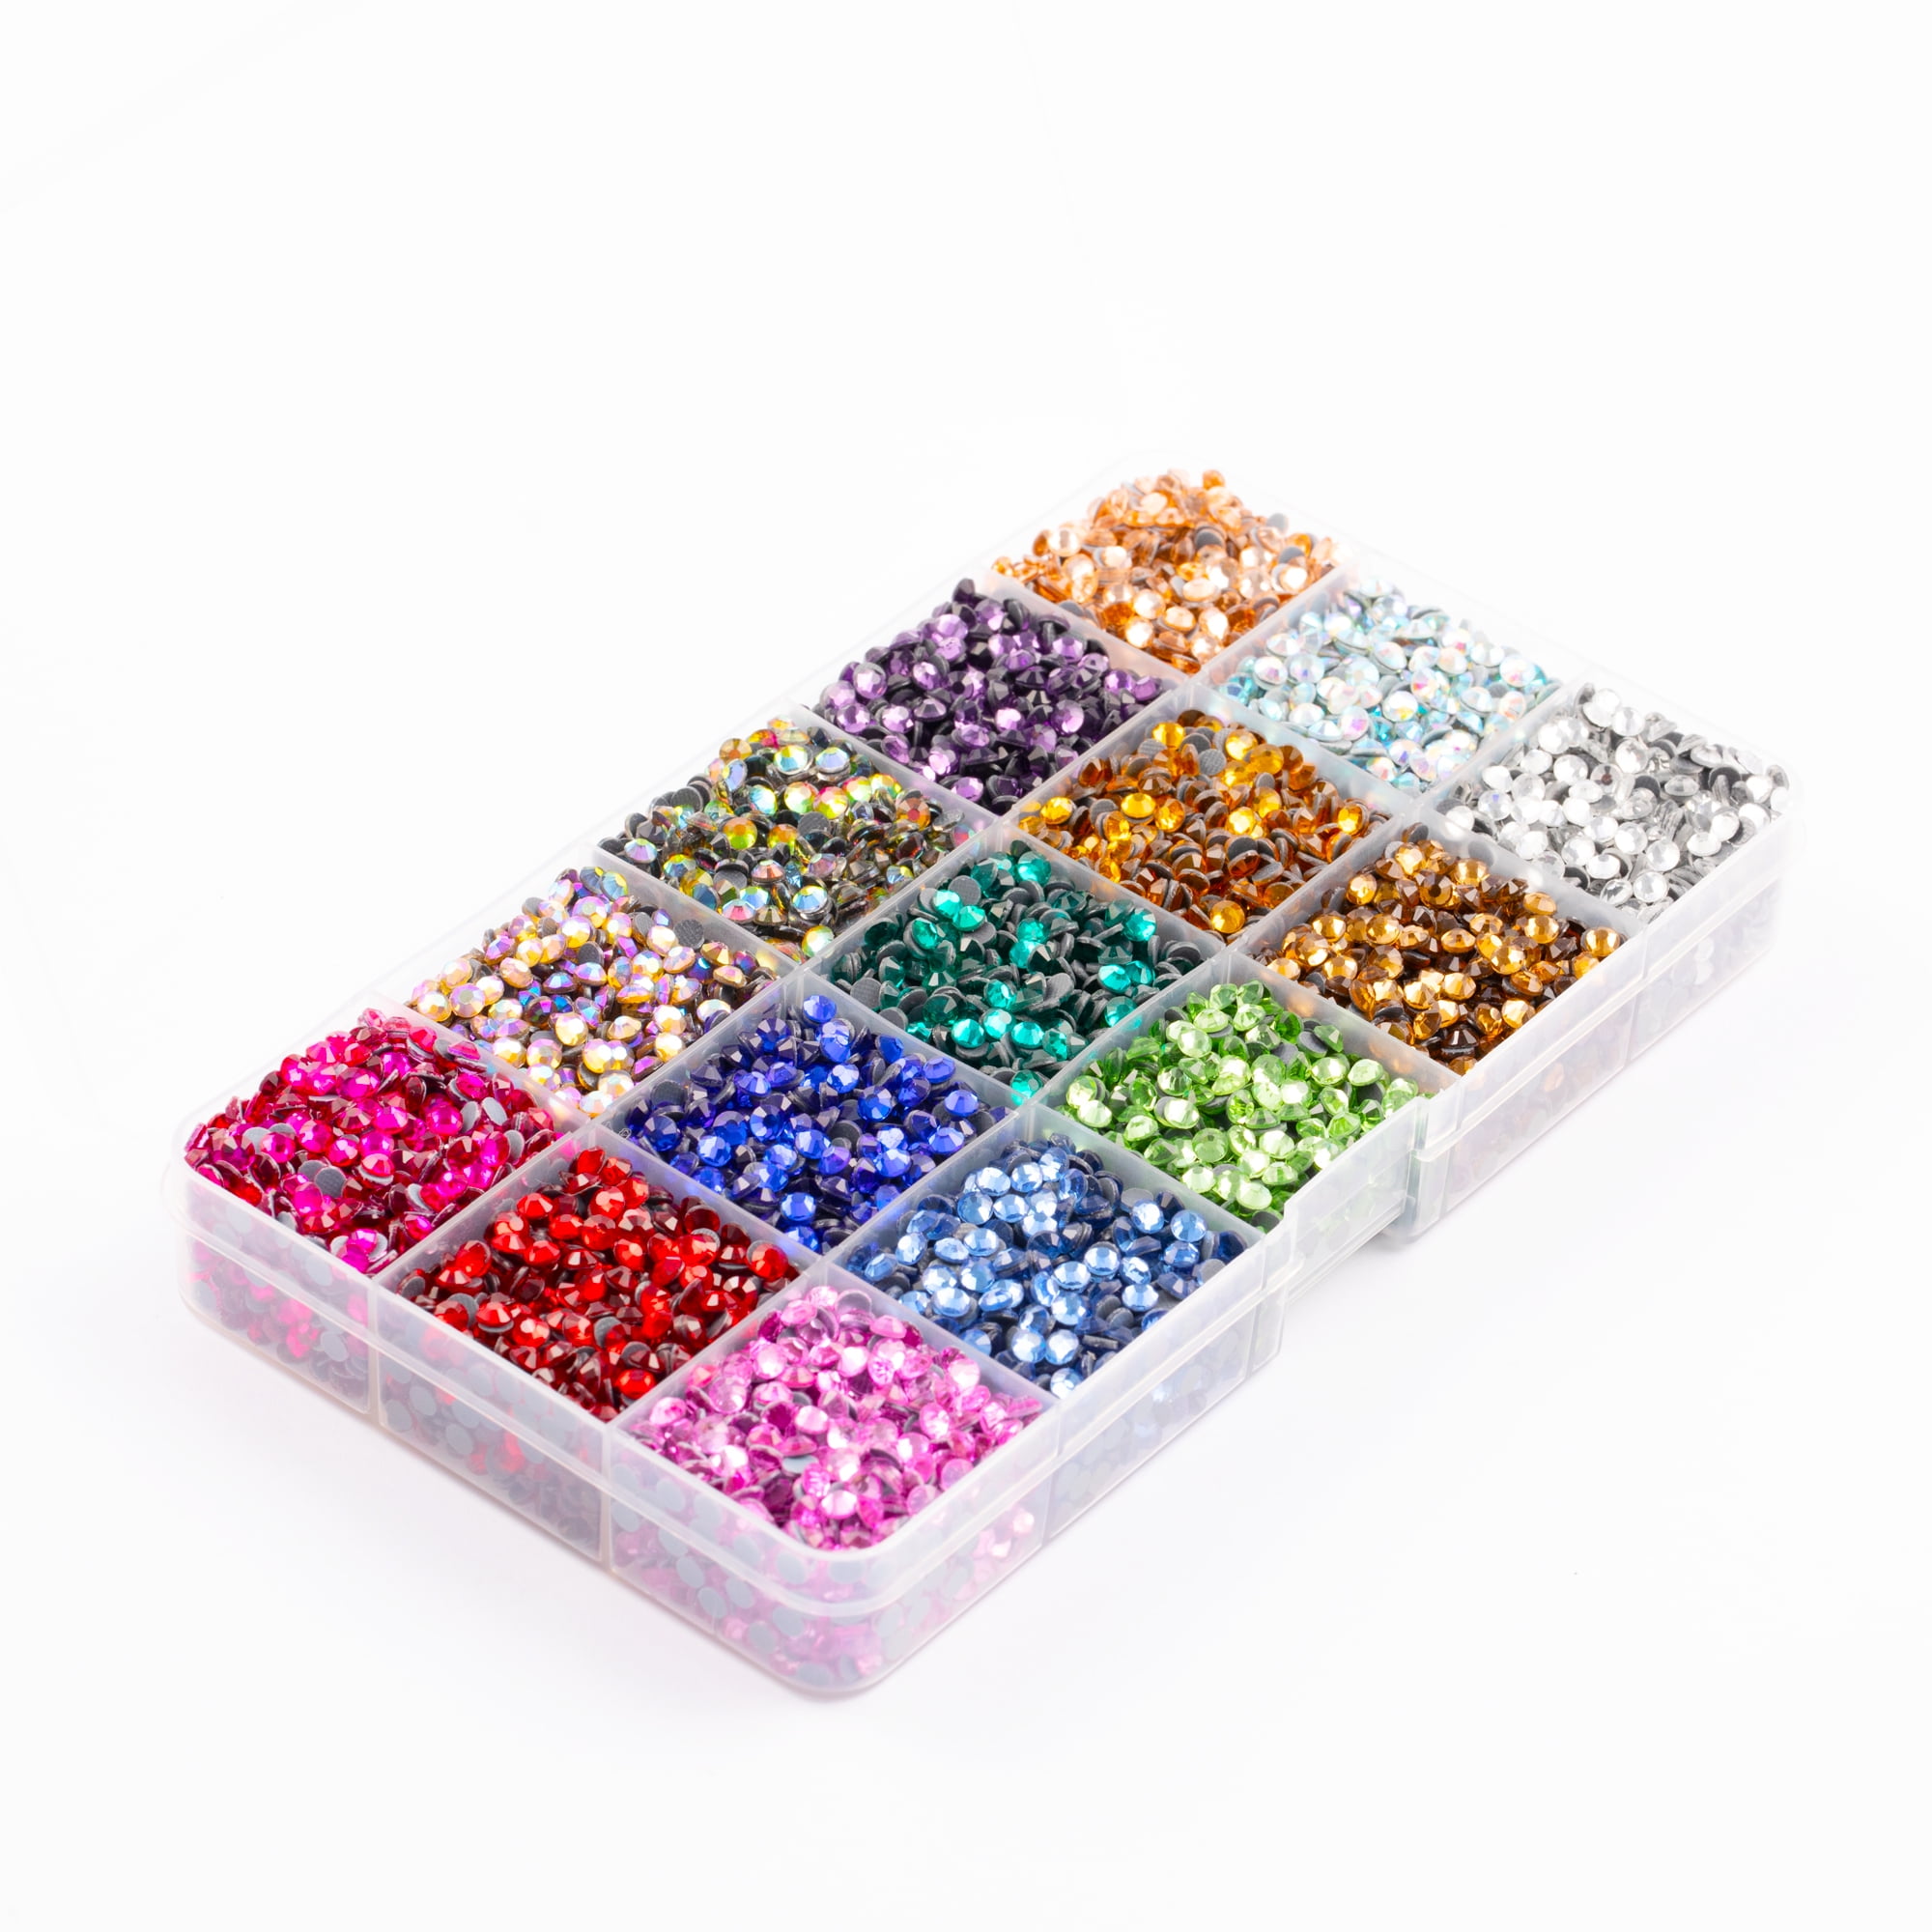 Hotfix Rhinestones Applicator with Large Rinestones Set and Flatback Pearls for Crafts Clothes Shoes, Bedazzler Kit Hot Fixed Rhinestones Pen